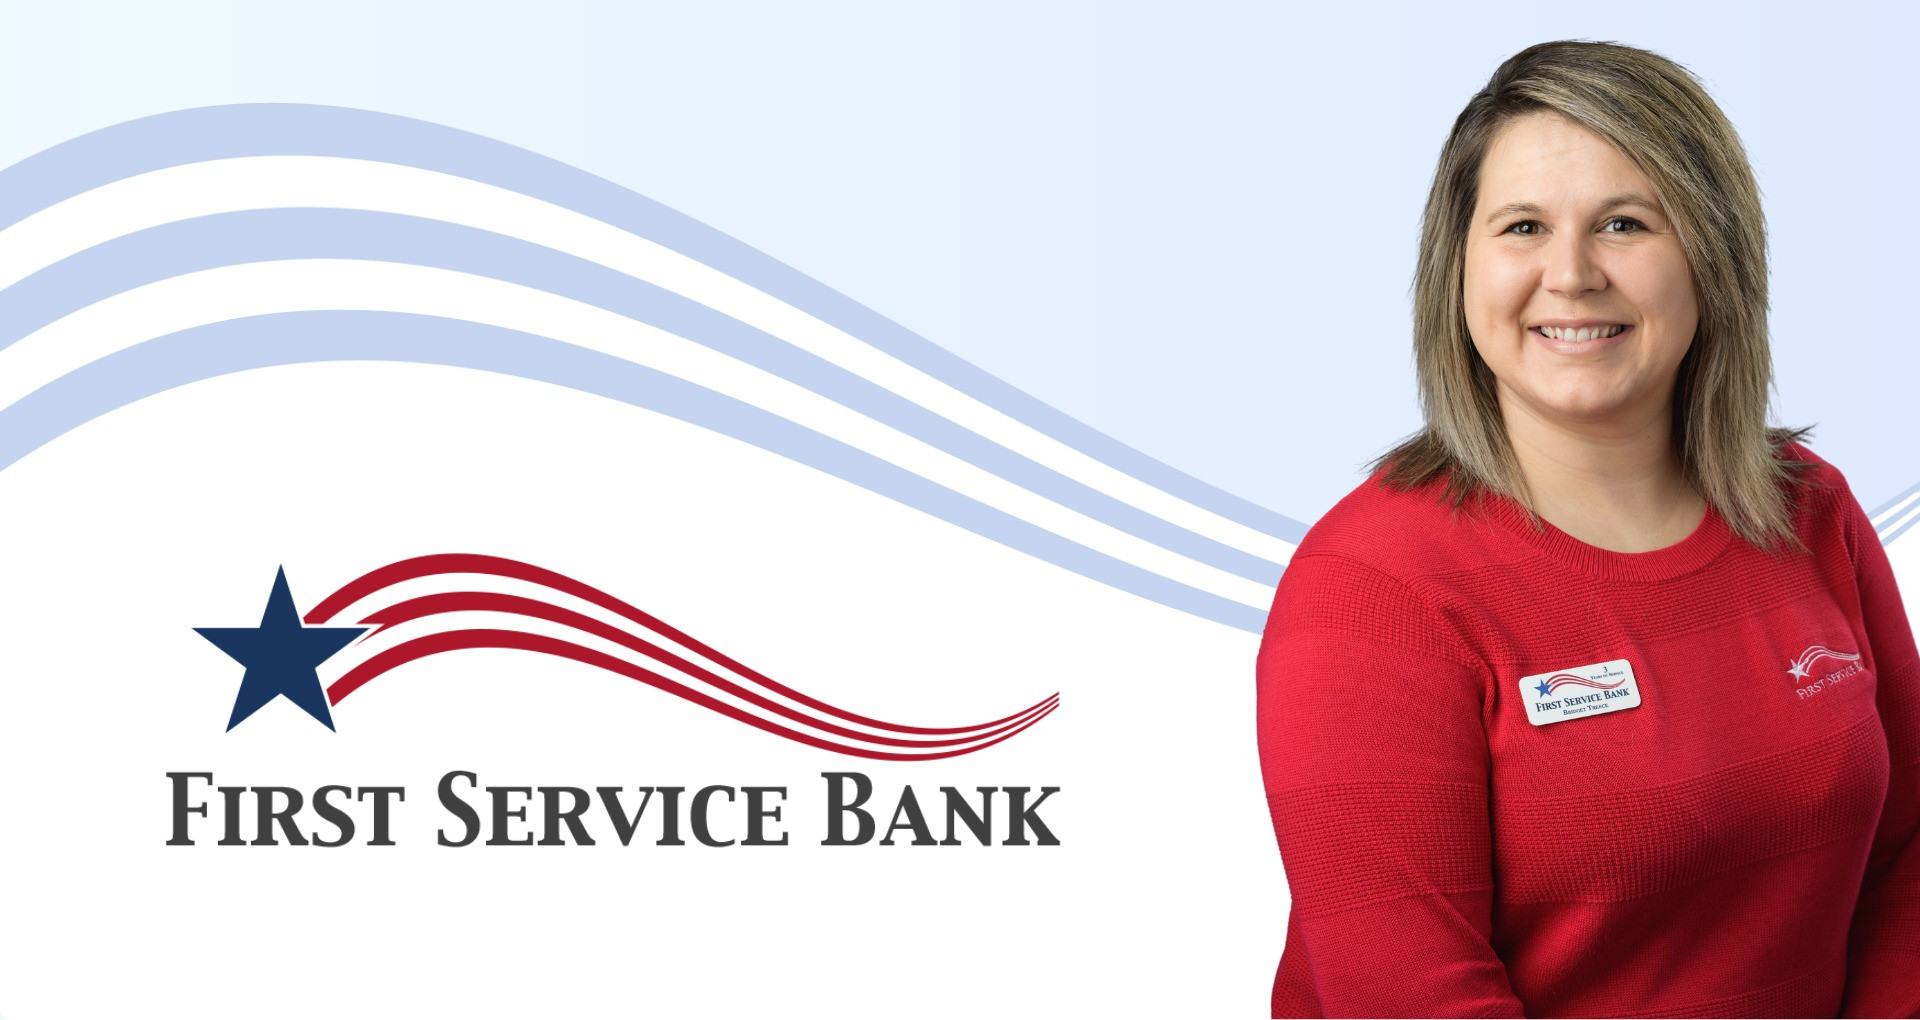 First Service Bank Announces Promotion of Bridget Basore to Assistant Branch Manager